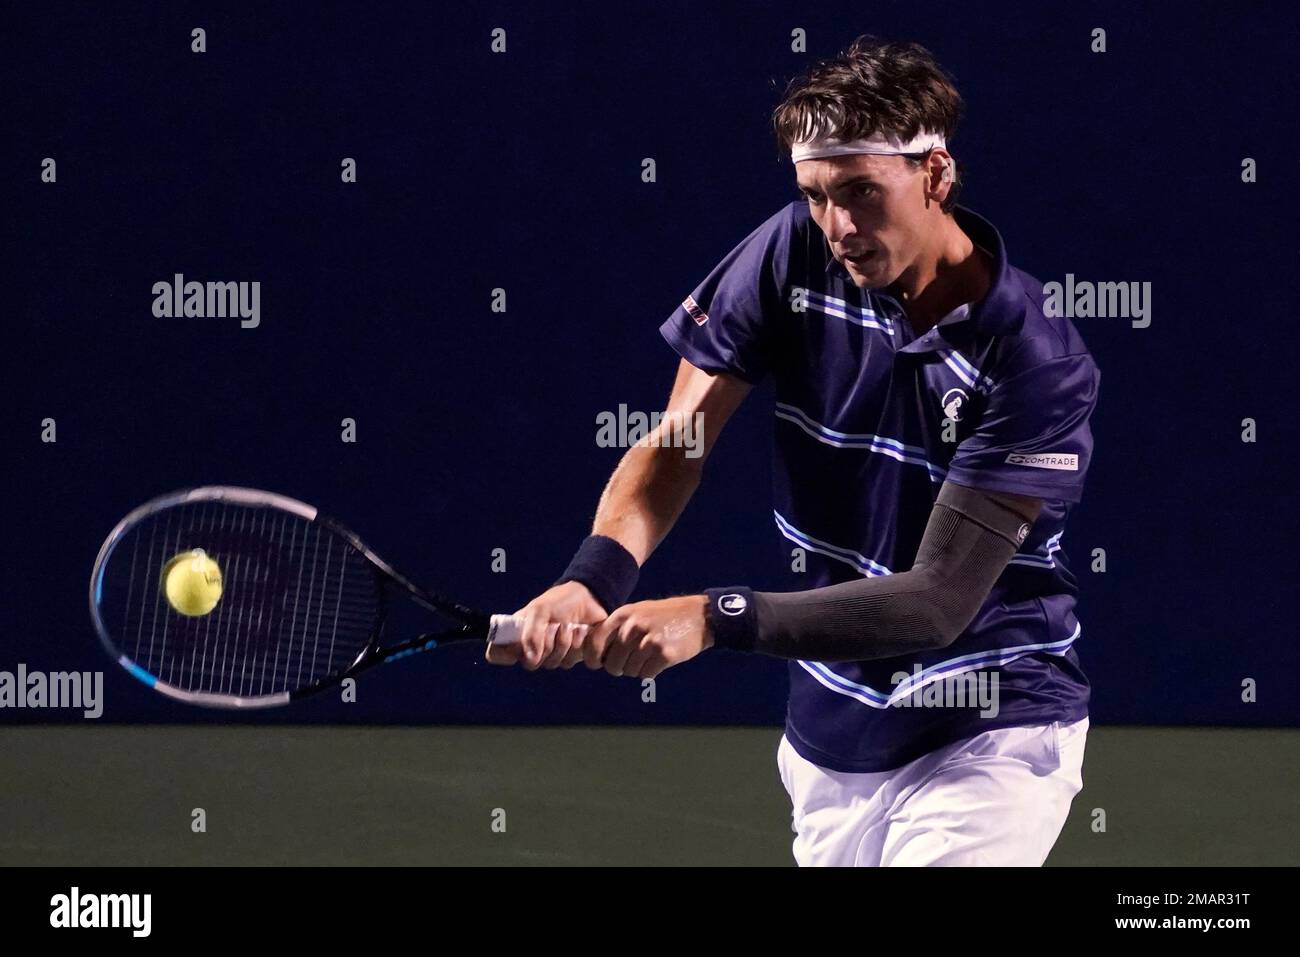 Marc-Andrea Huesler, of Switzerland, returns shot against Laslo Djere, of Serbia, during their semifinal match in the Winston-Salem Open tennis tournament in Winston-Salem, N.C., Friday, Aug